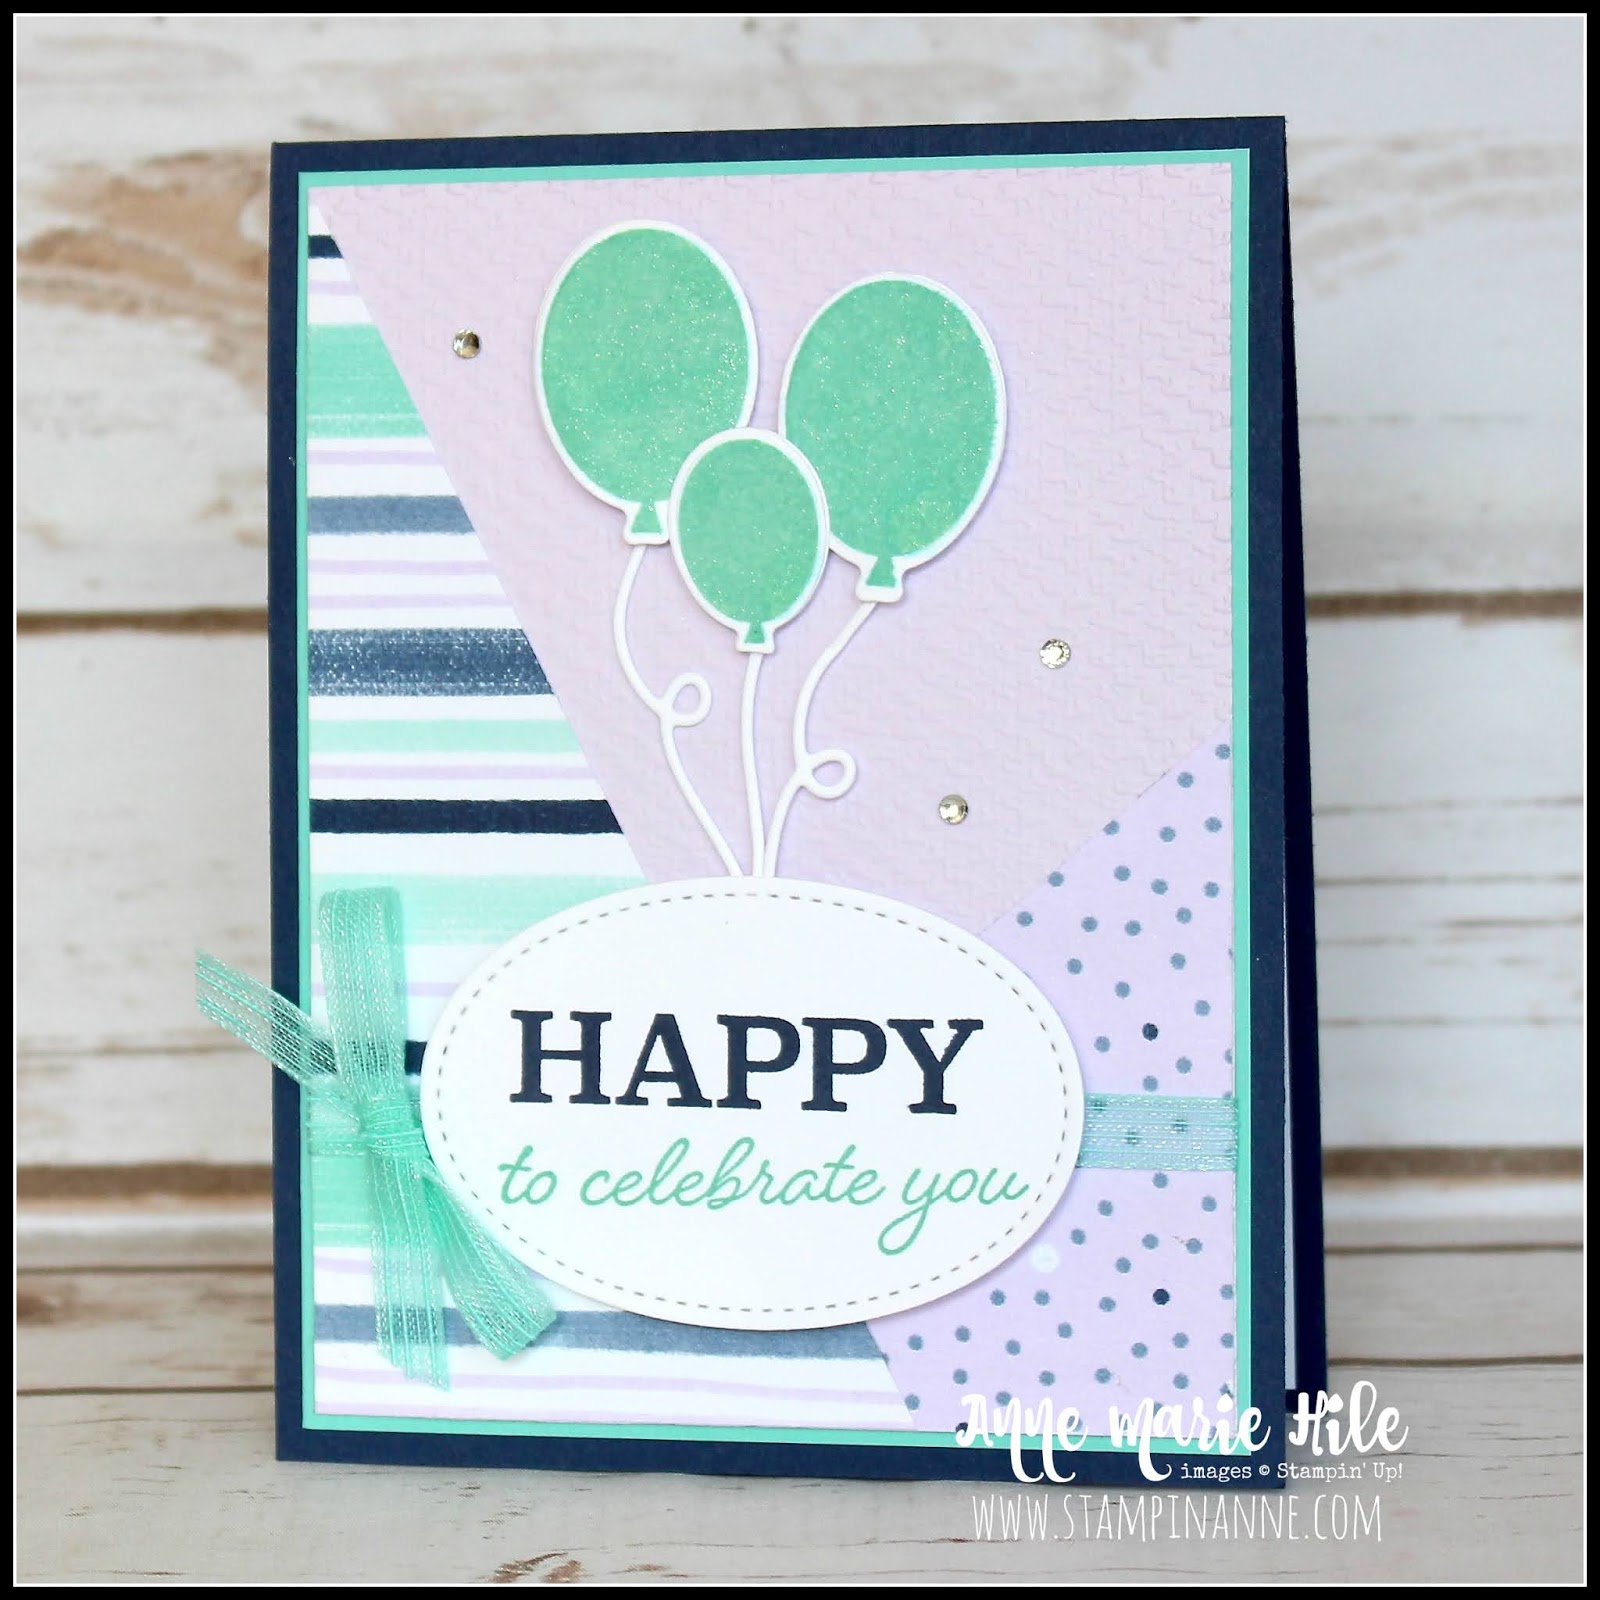 Stampin' Anne: So Much Happy for PP505